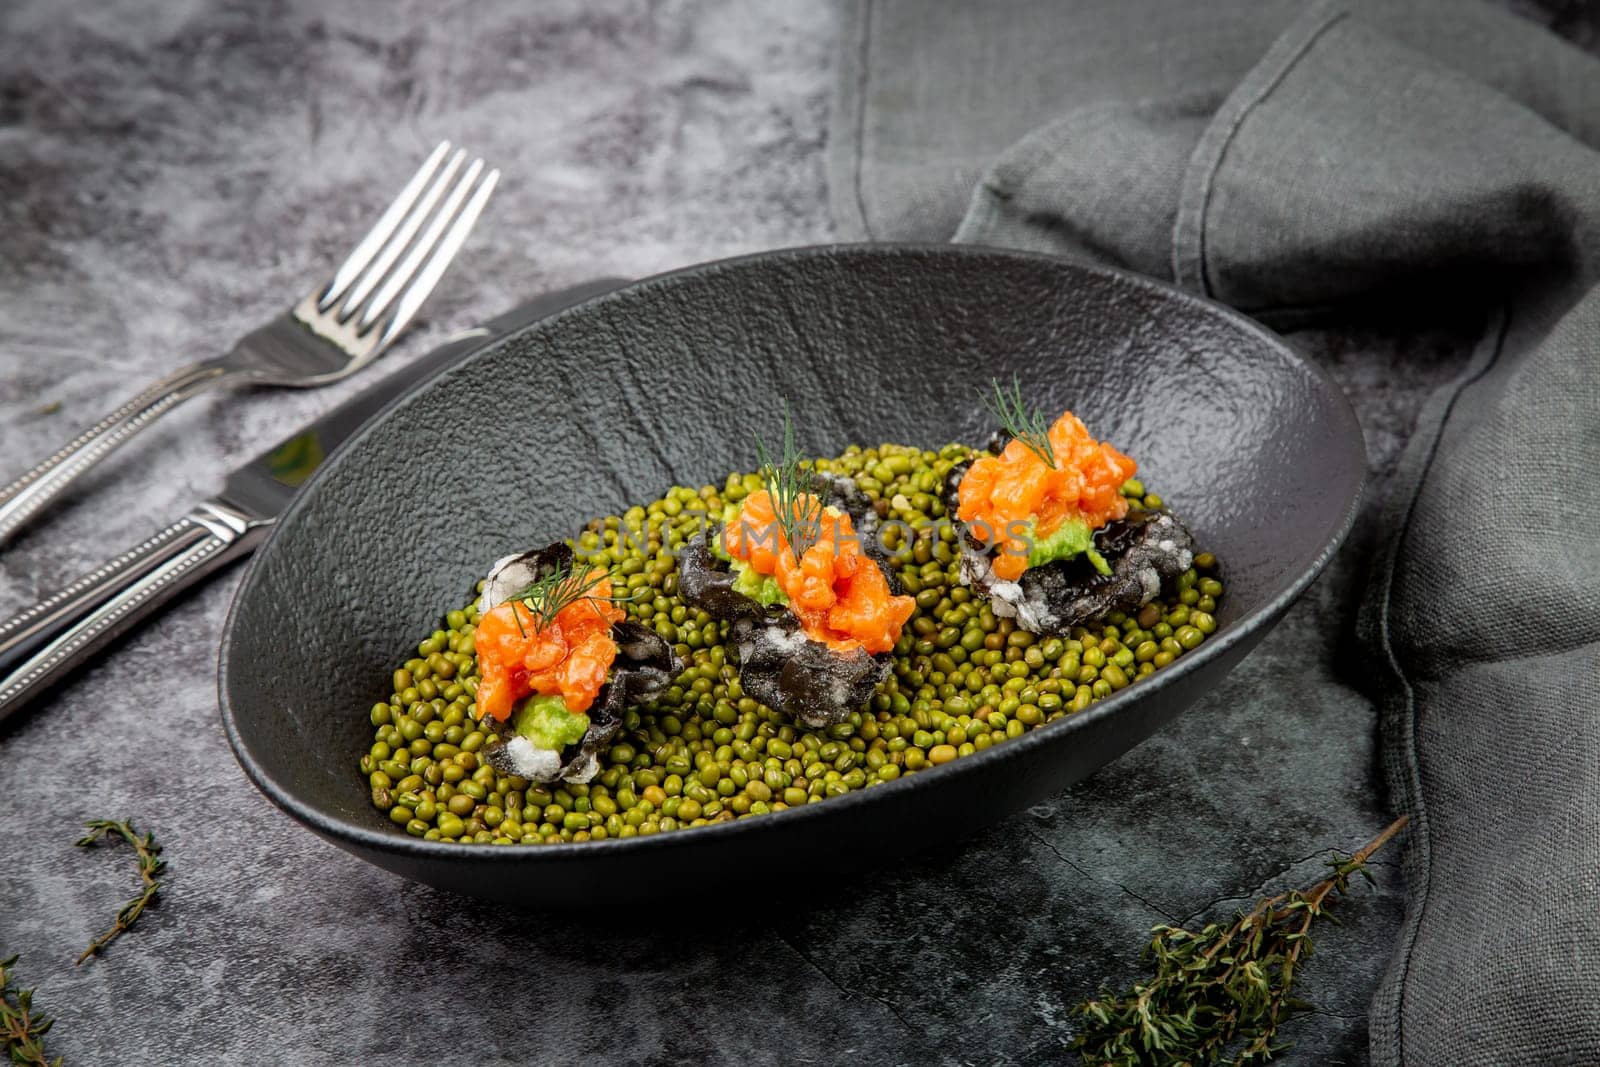 black caviar, red fish and wassabi on a plate with peas, top view by tewolf